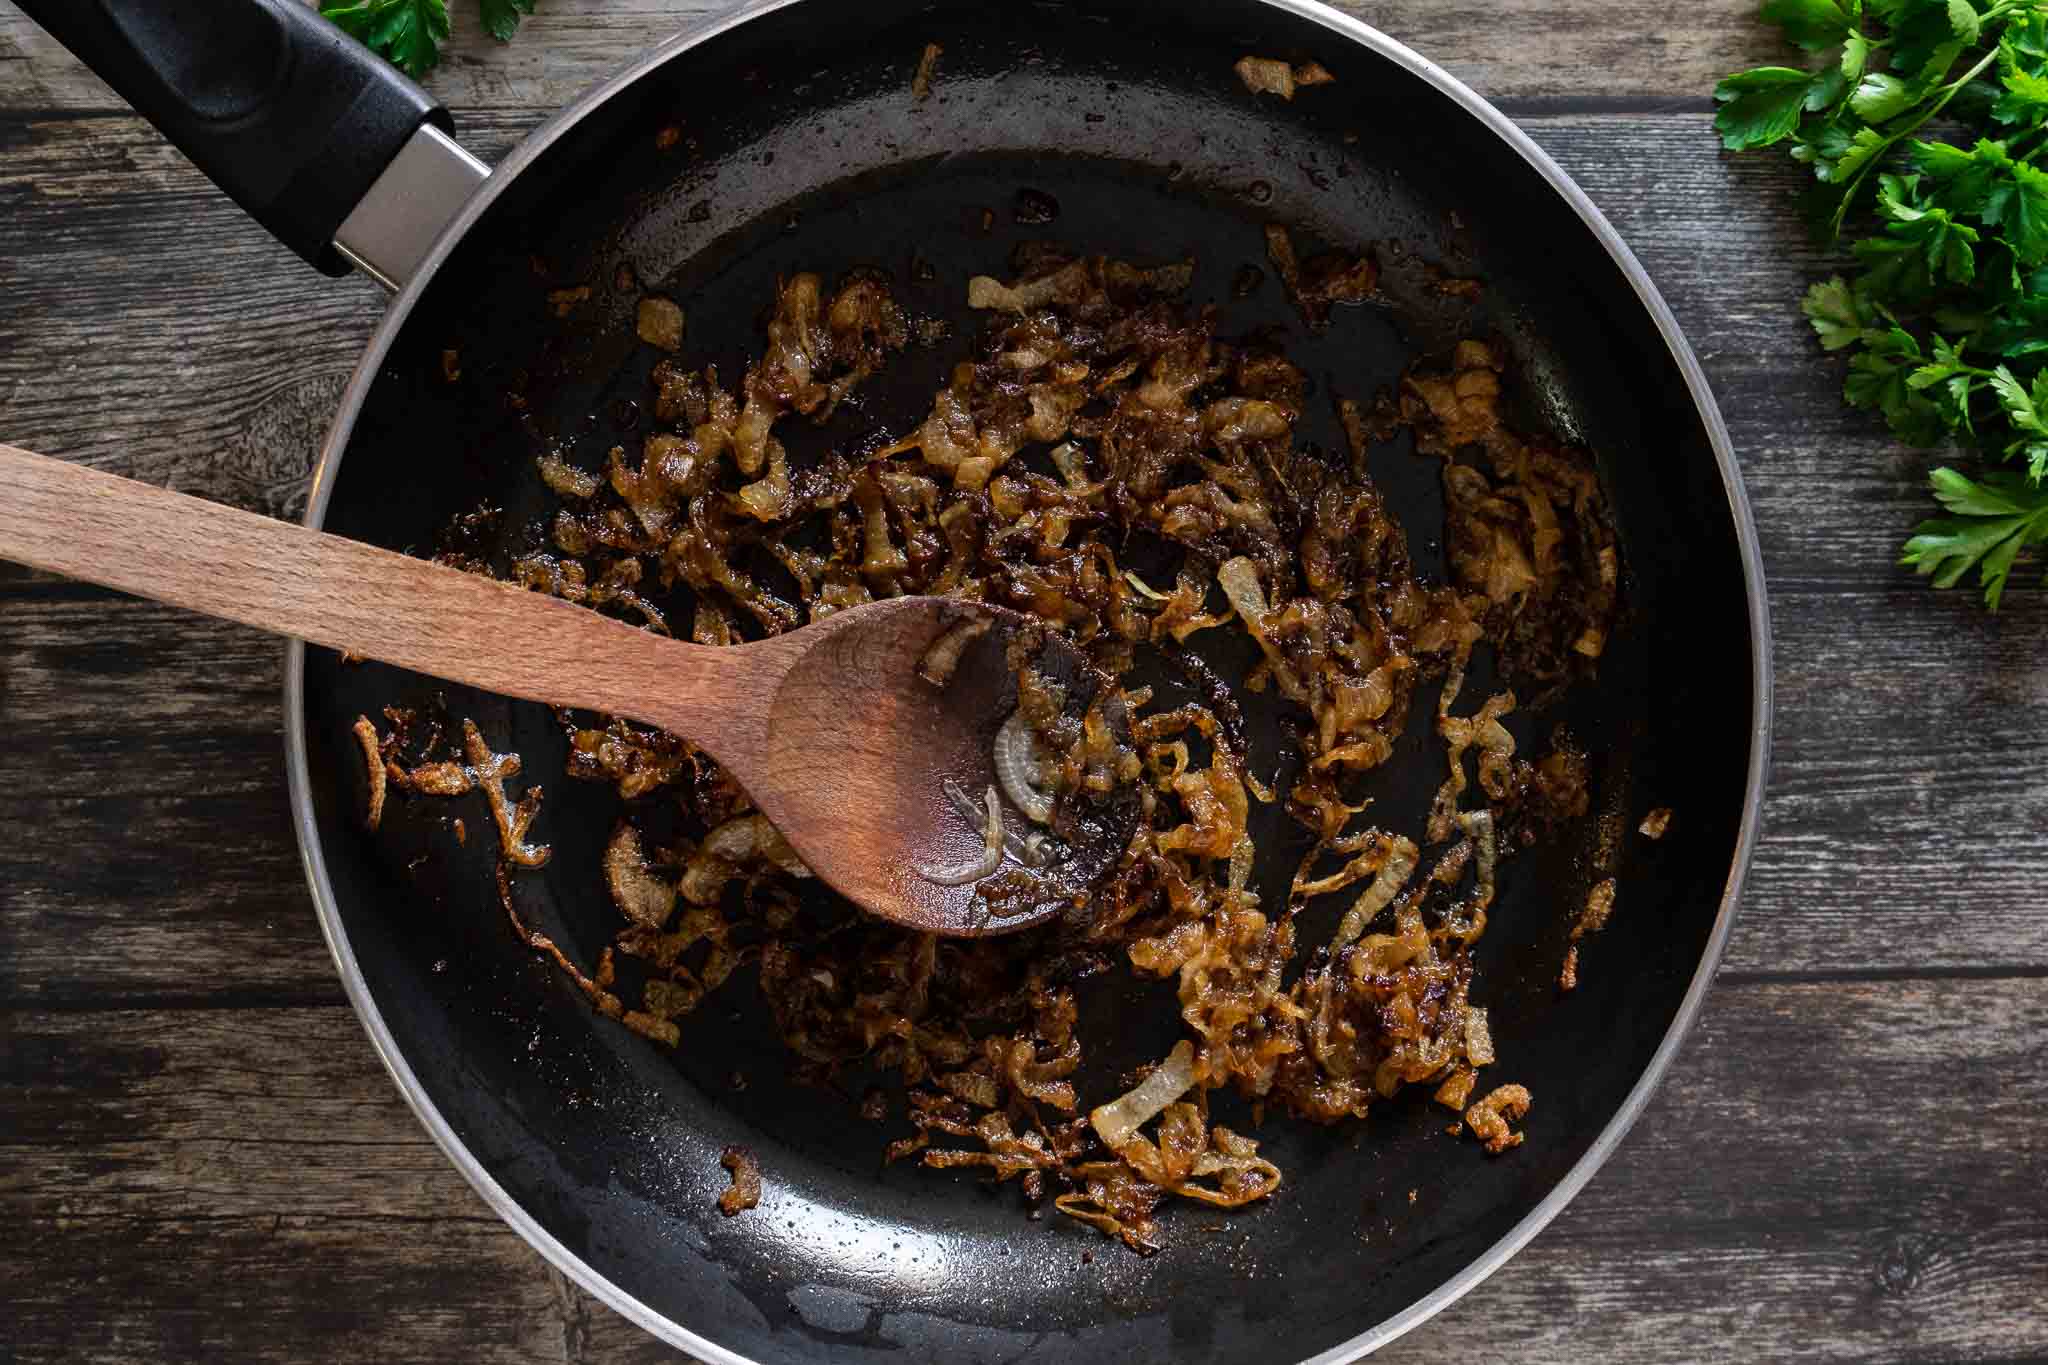 Deeply golden brown caramelized onions.